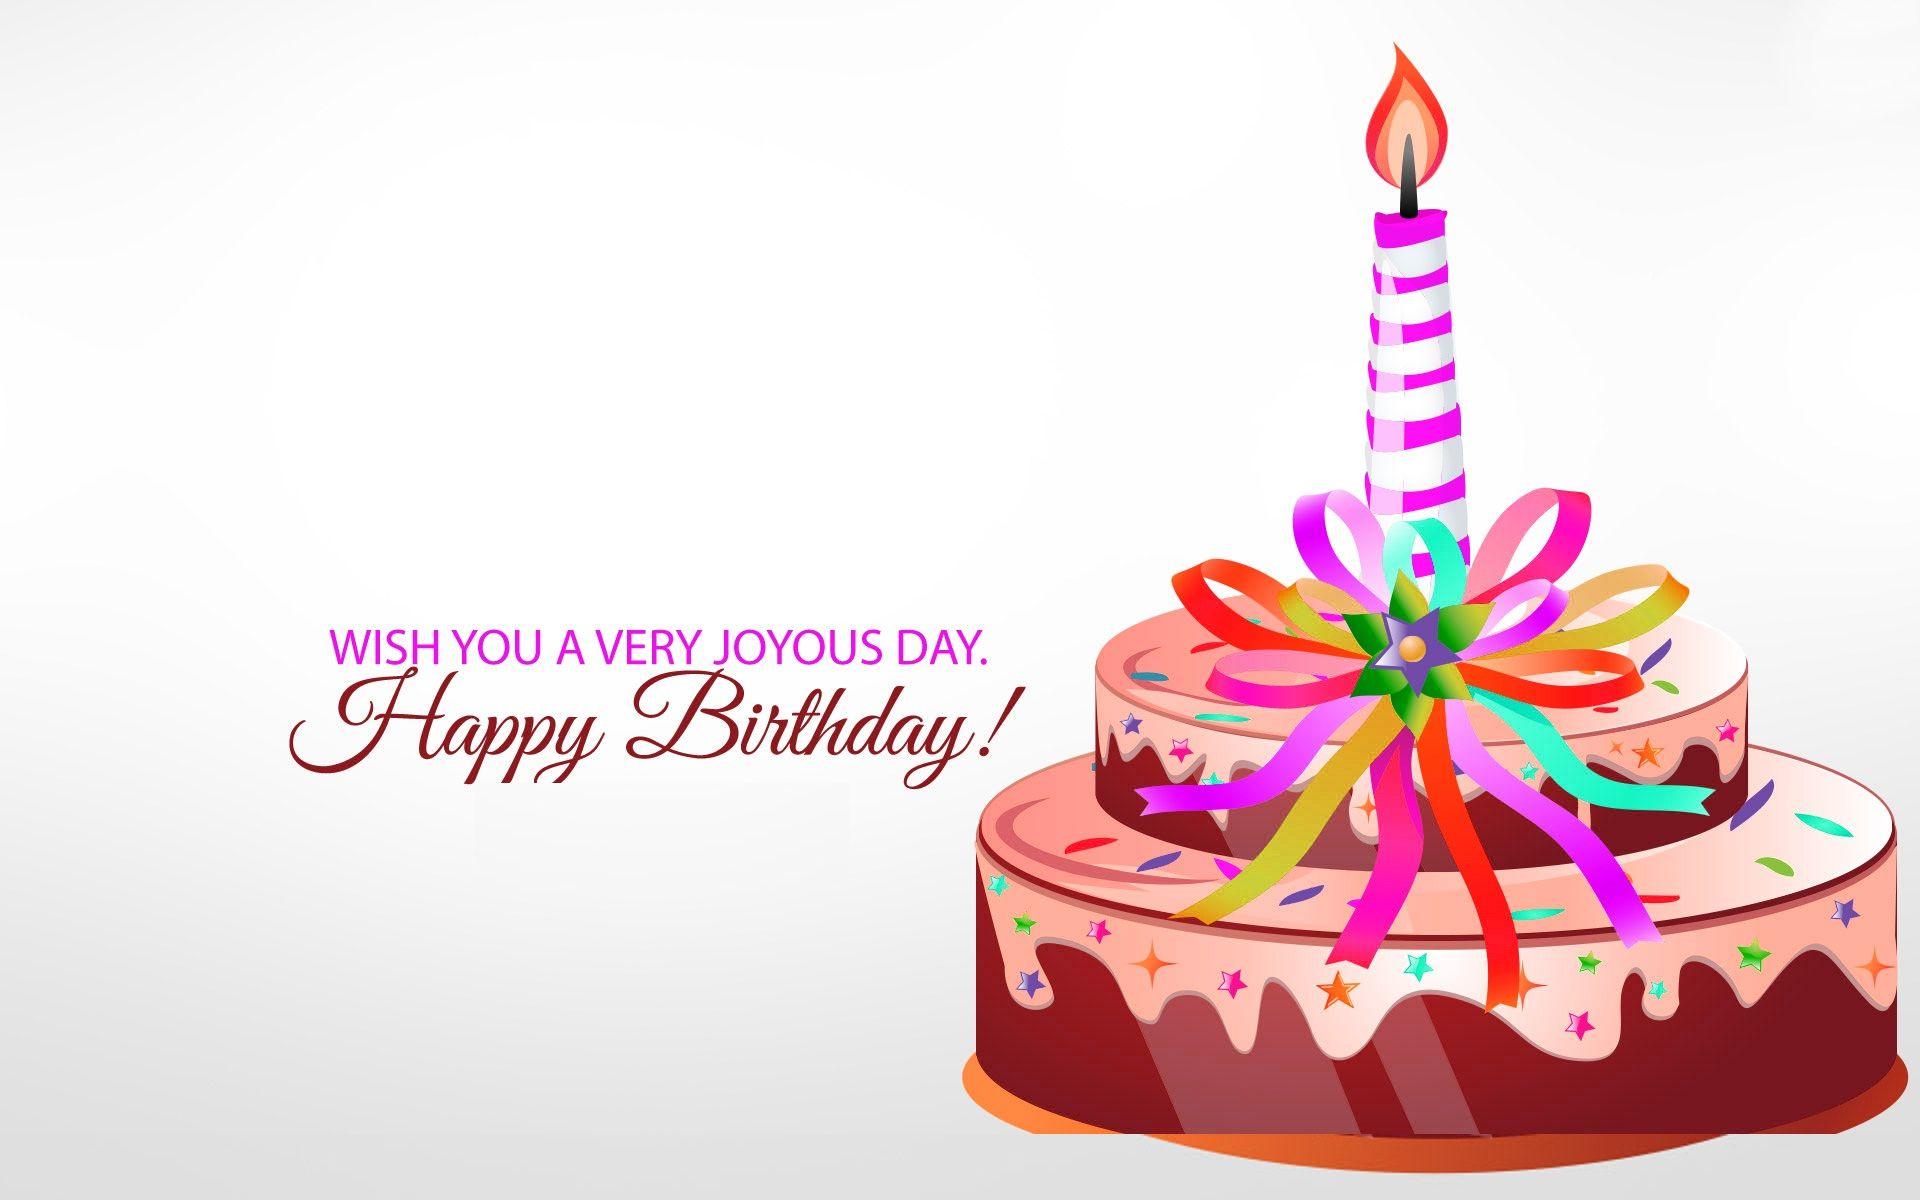 Happy Birthday Wishes Wallpaper, Image, Picture, Photos, HD Wallpaper